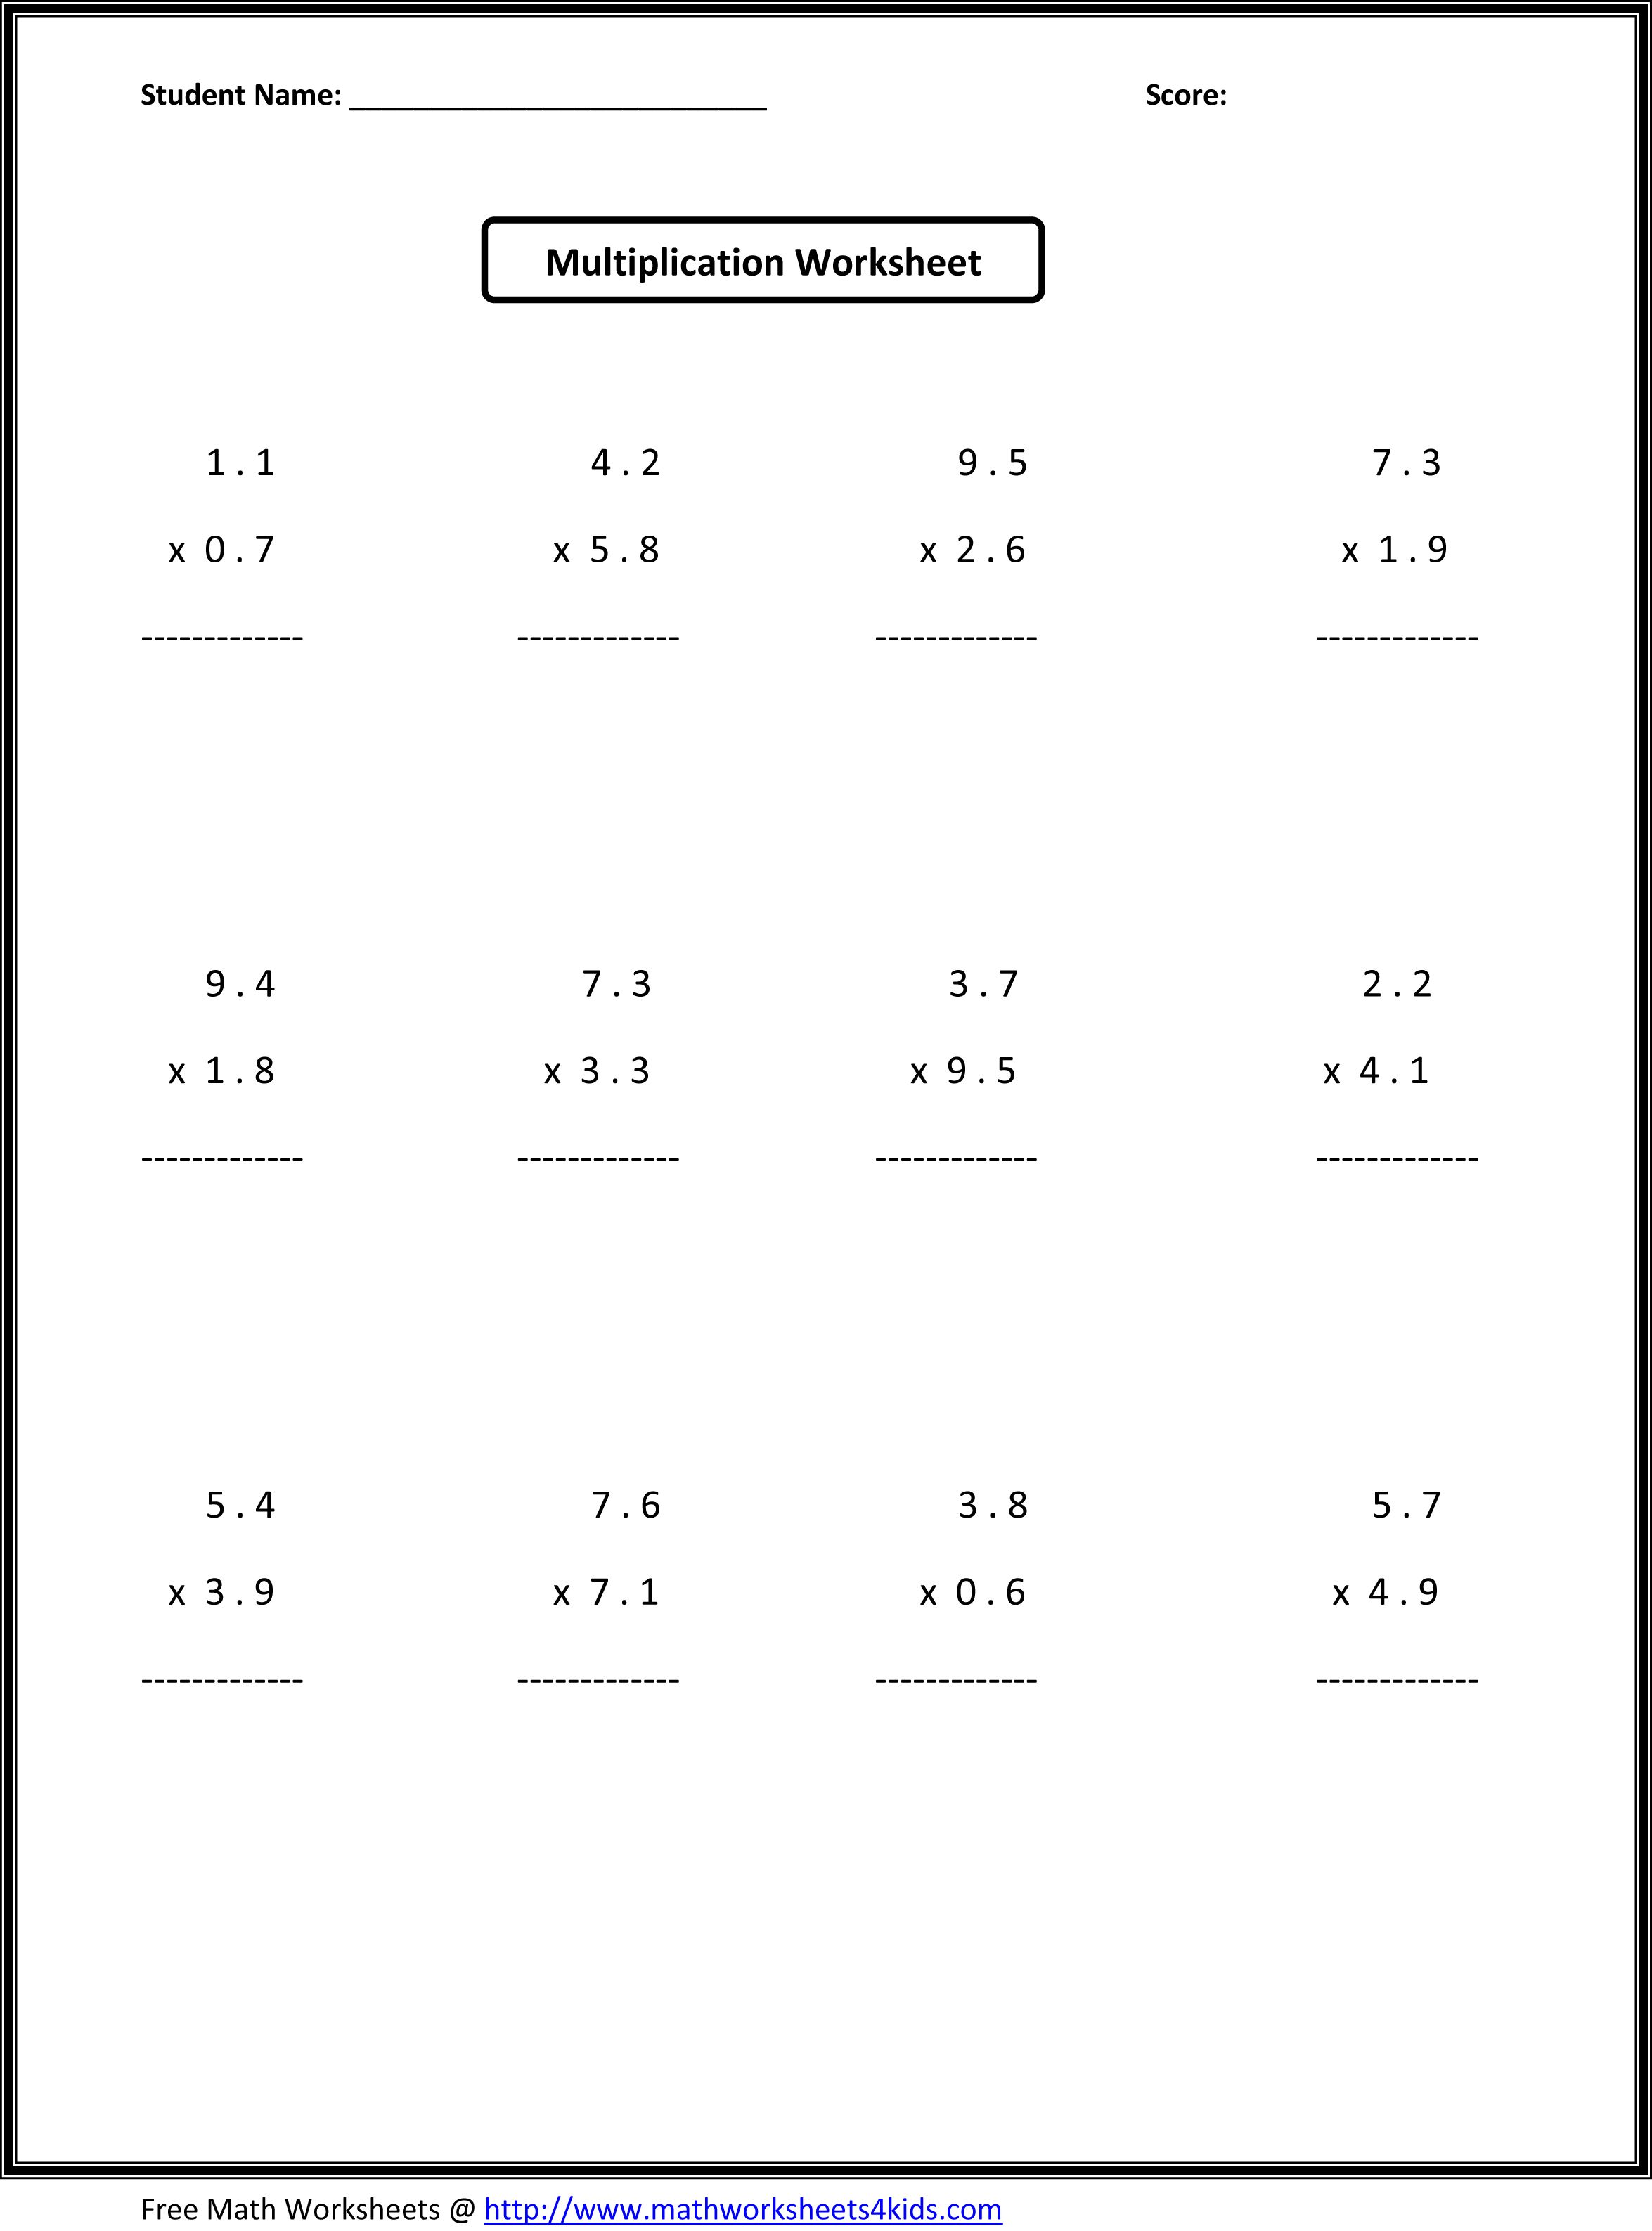 Printables Math Worksheets For 7th Graders 7th grade algebra worksheets math places value absolute based on basic math